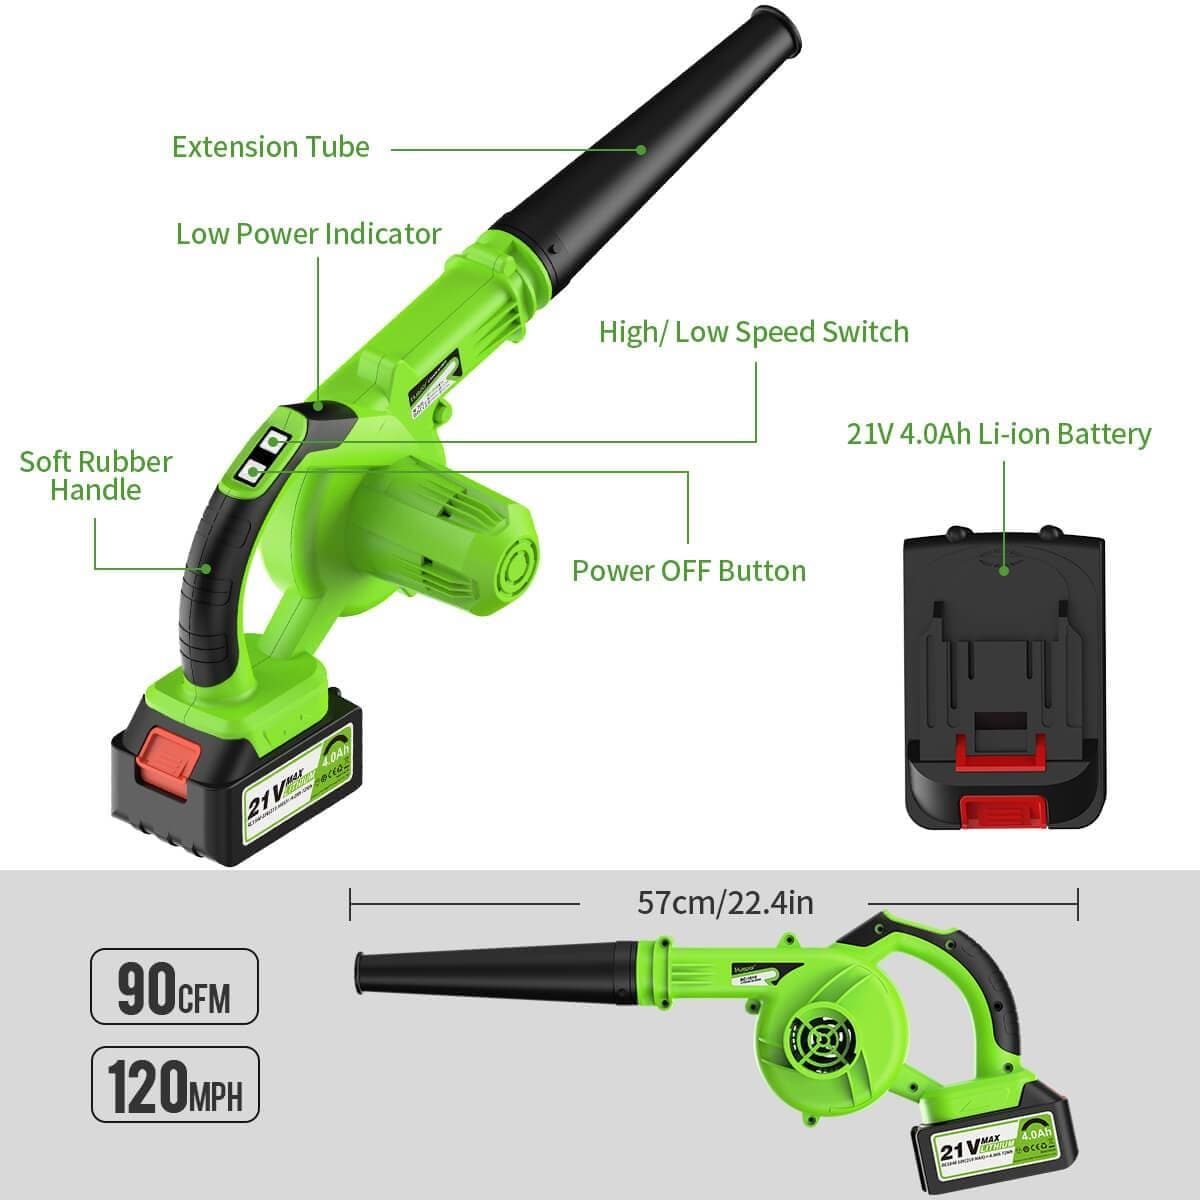 Cordless electric handheld leaf blower for blowing leaves and dust, vacuuming capabilities, with advanced technology by Huepar, free shipping4